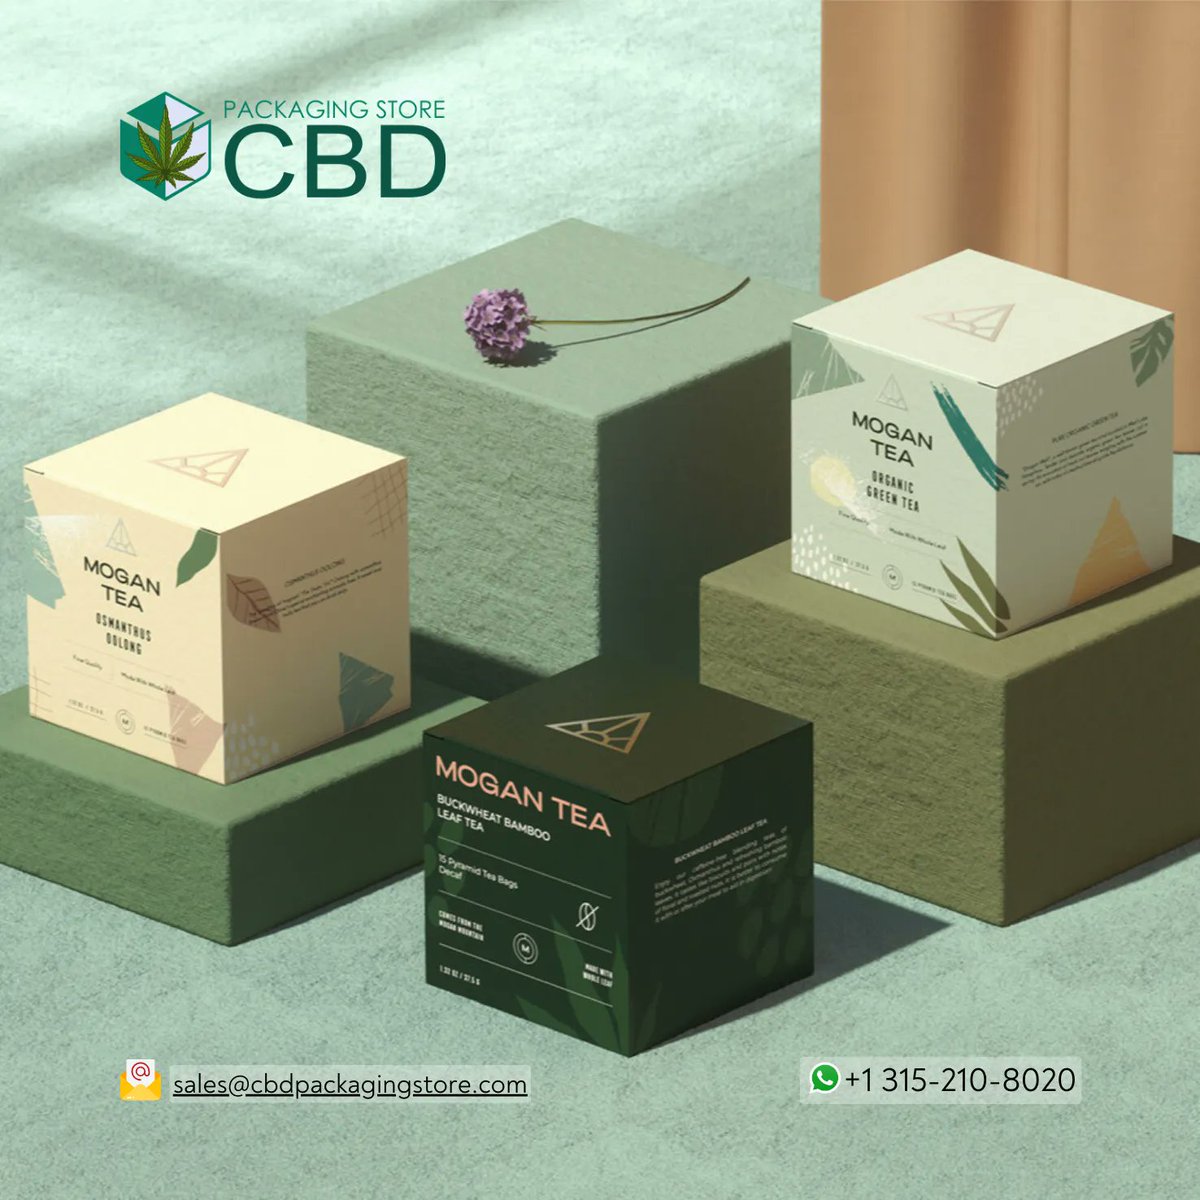 ☕️ Sip your way to relaxation with our exquisite CBD Tea Packaging Boxes! ✨📦  buff.ly/3MEu2qu 

#CBDPackagingStore #CBD #CBDTeaPackaging #RelaxationInACup #PremiumQuality #SustainableChoice #TeaLovers #CBDWellness #MindfulMoments #EcoFriendly #TeaExperience